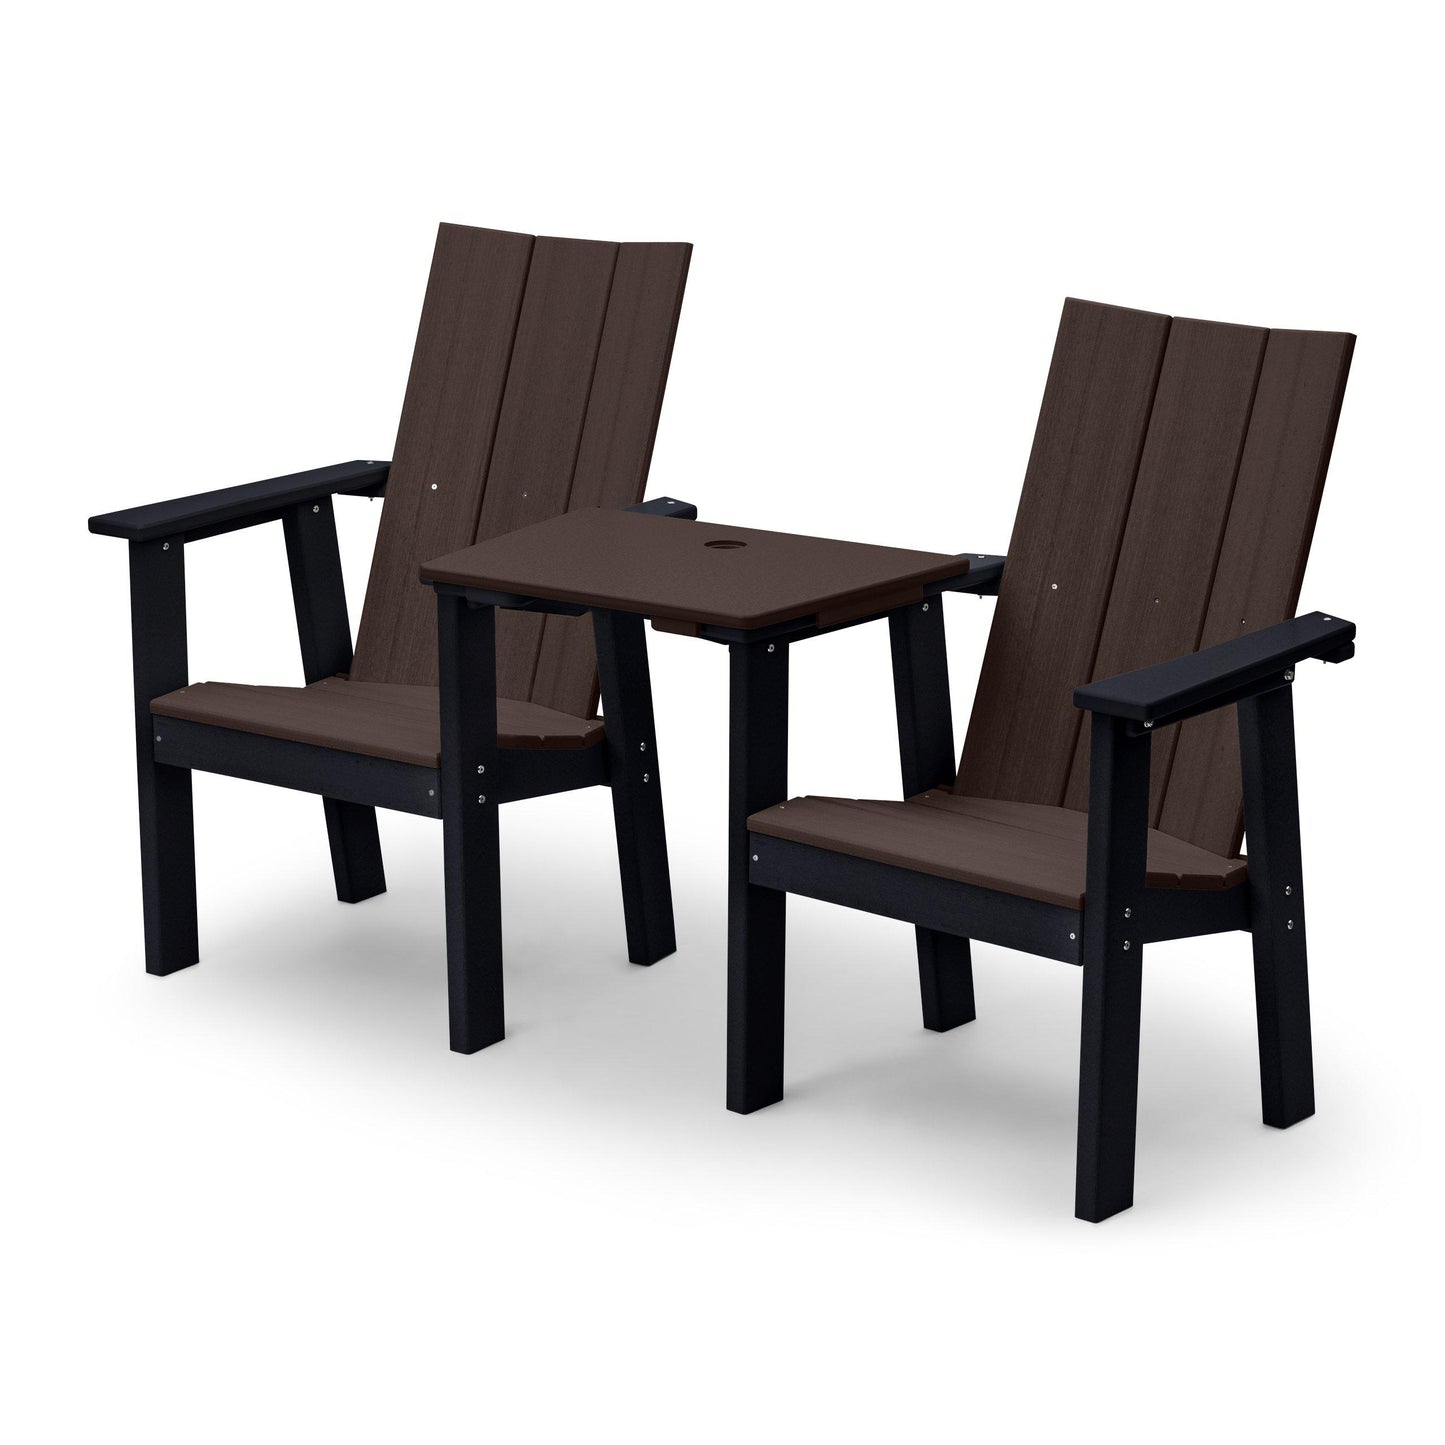 Perfect Choice Recycled Plastic Stanton Upright Adirondack Tete-A-Tete Chair Set - LEAD TIME TO SHIP 4 WEEKS OR LESS